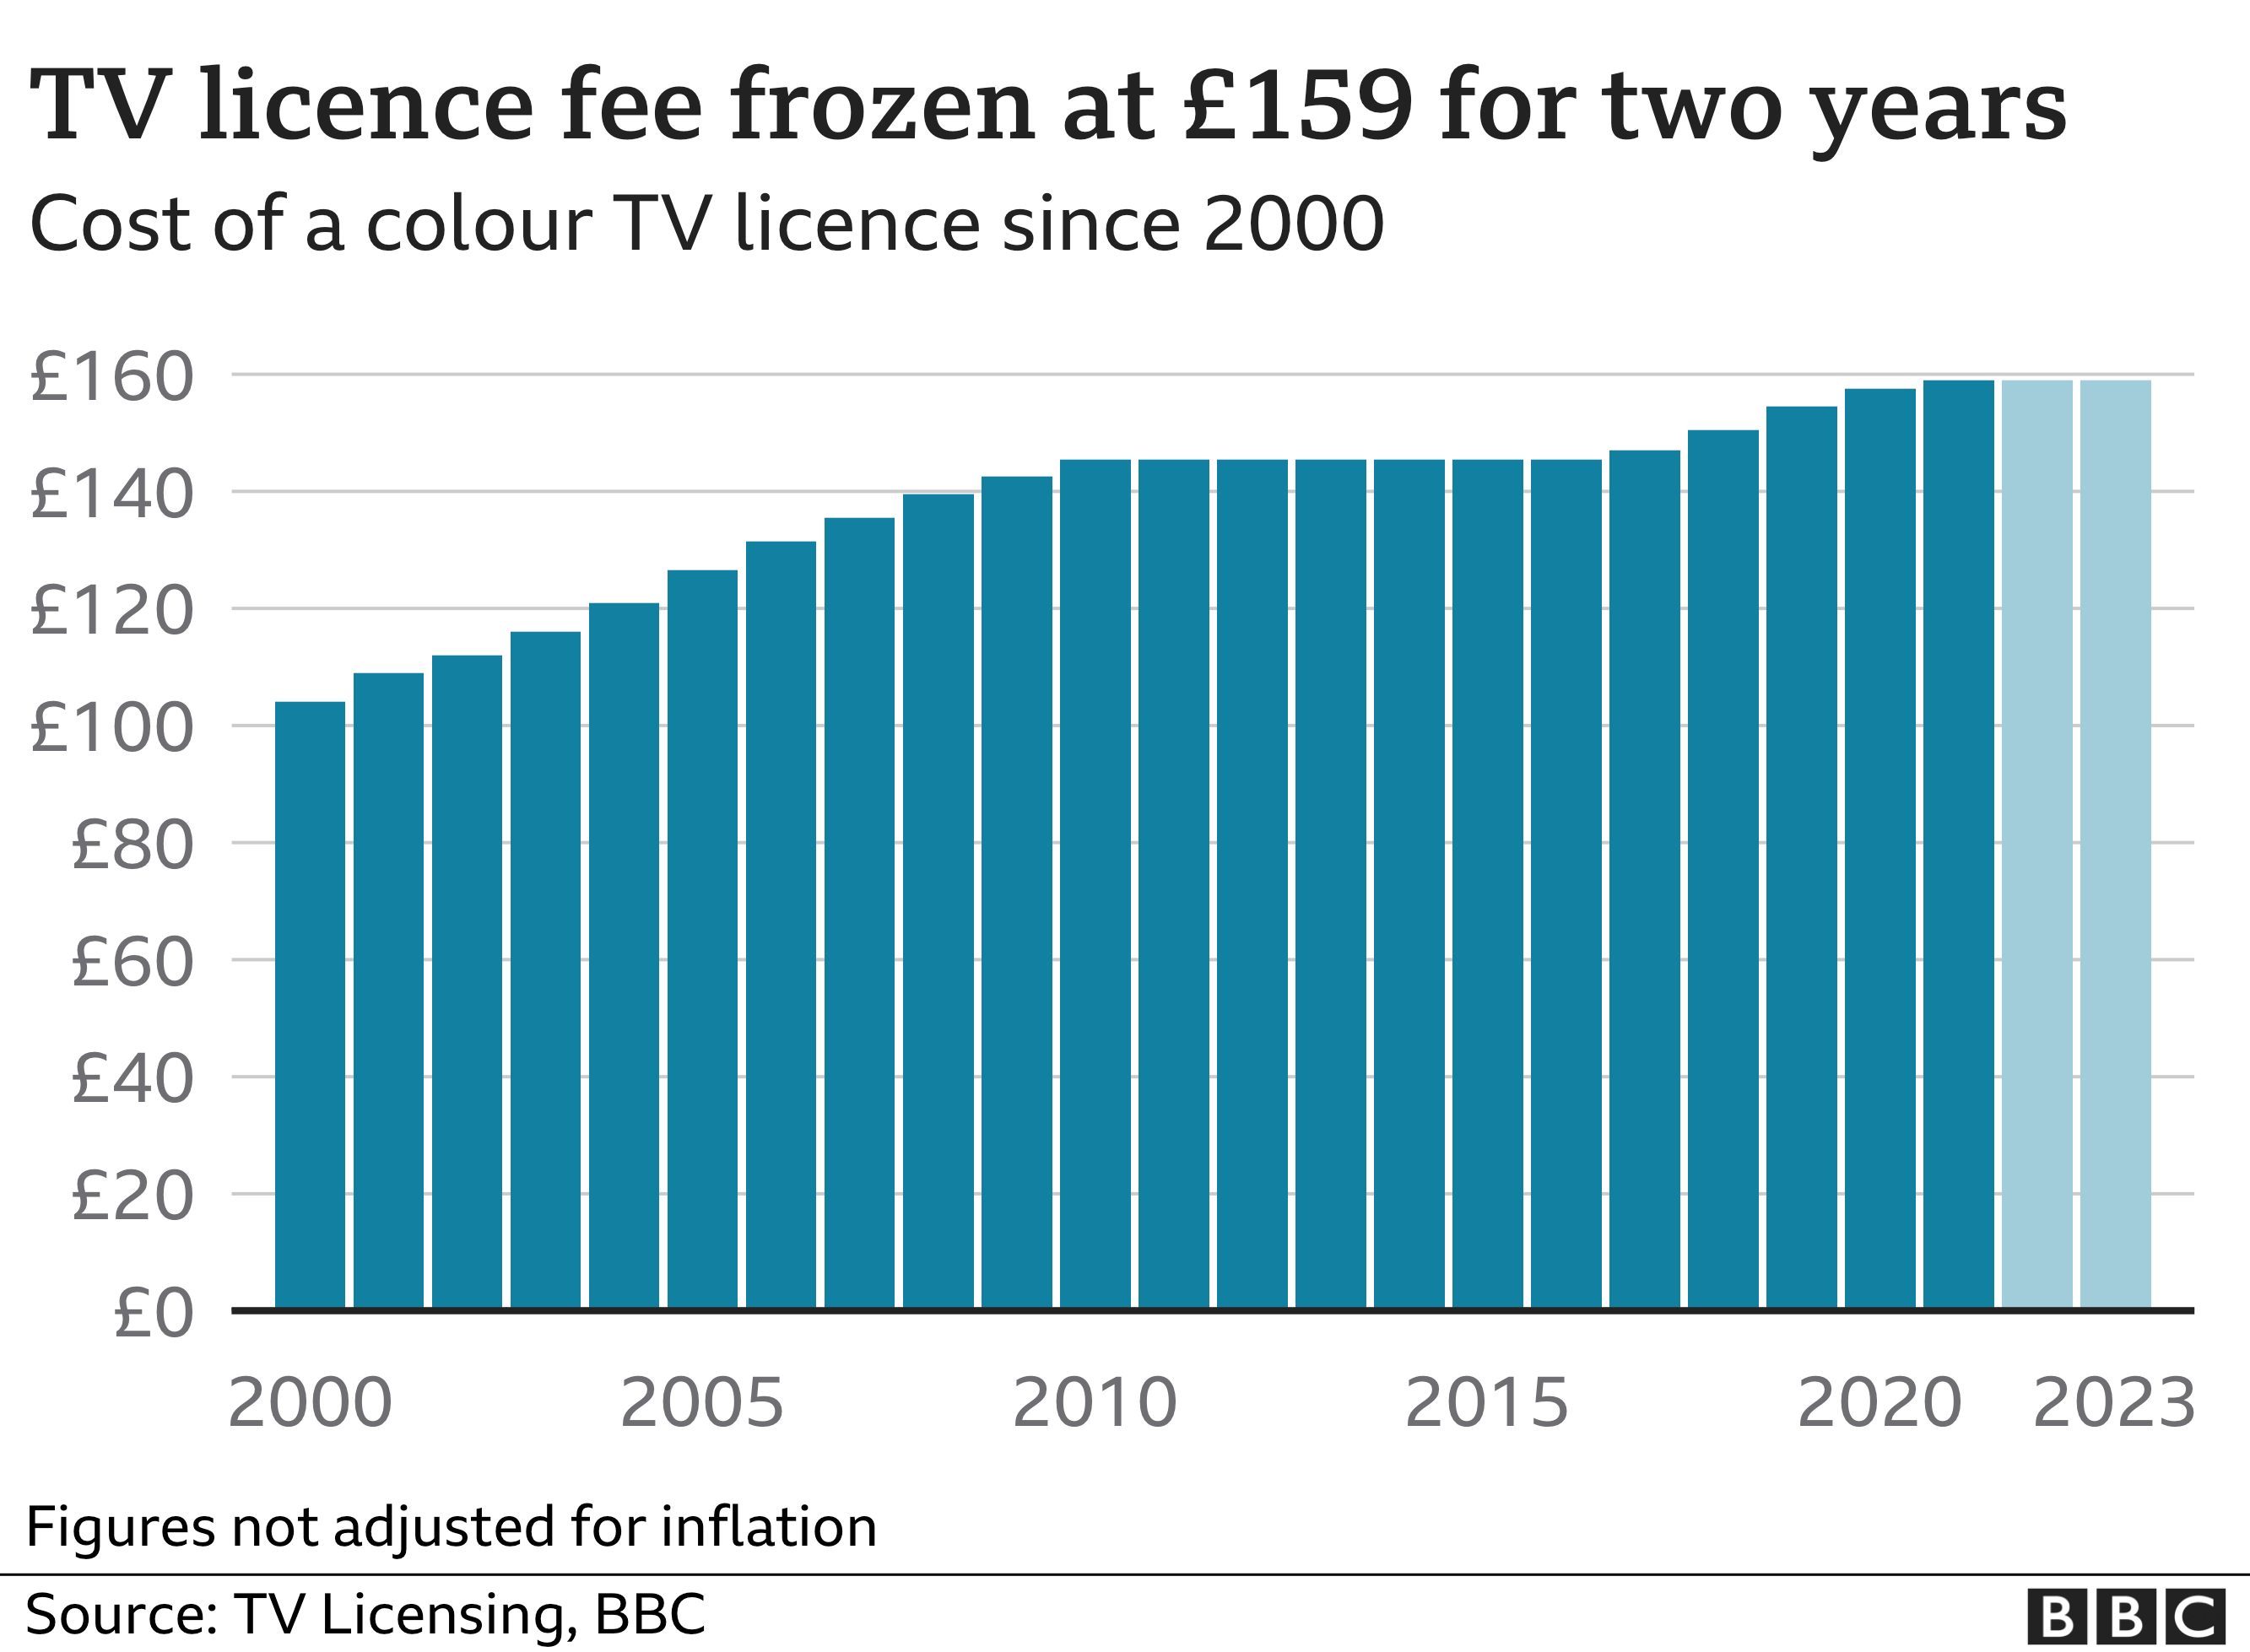 TV licence fee frozen at £159 for two years - bar chart showing the increase in the fee since 2000